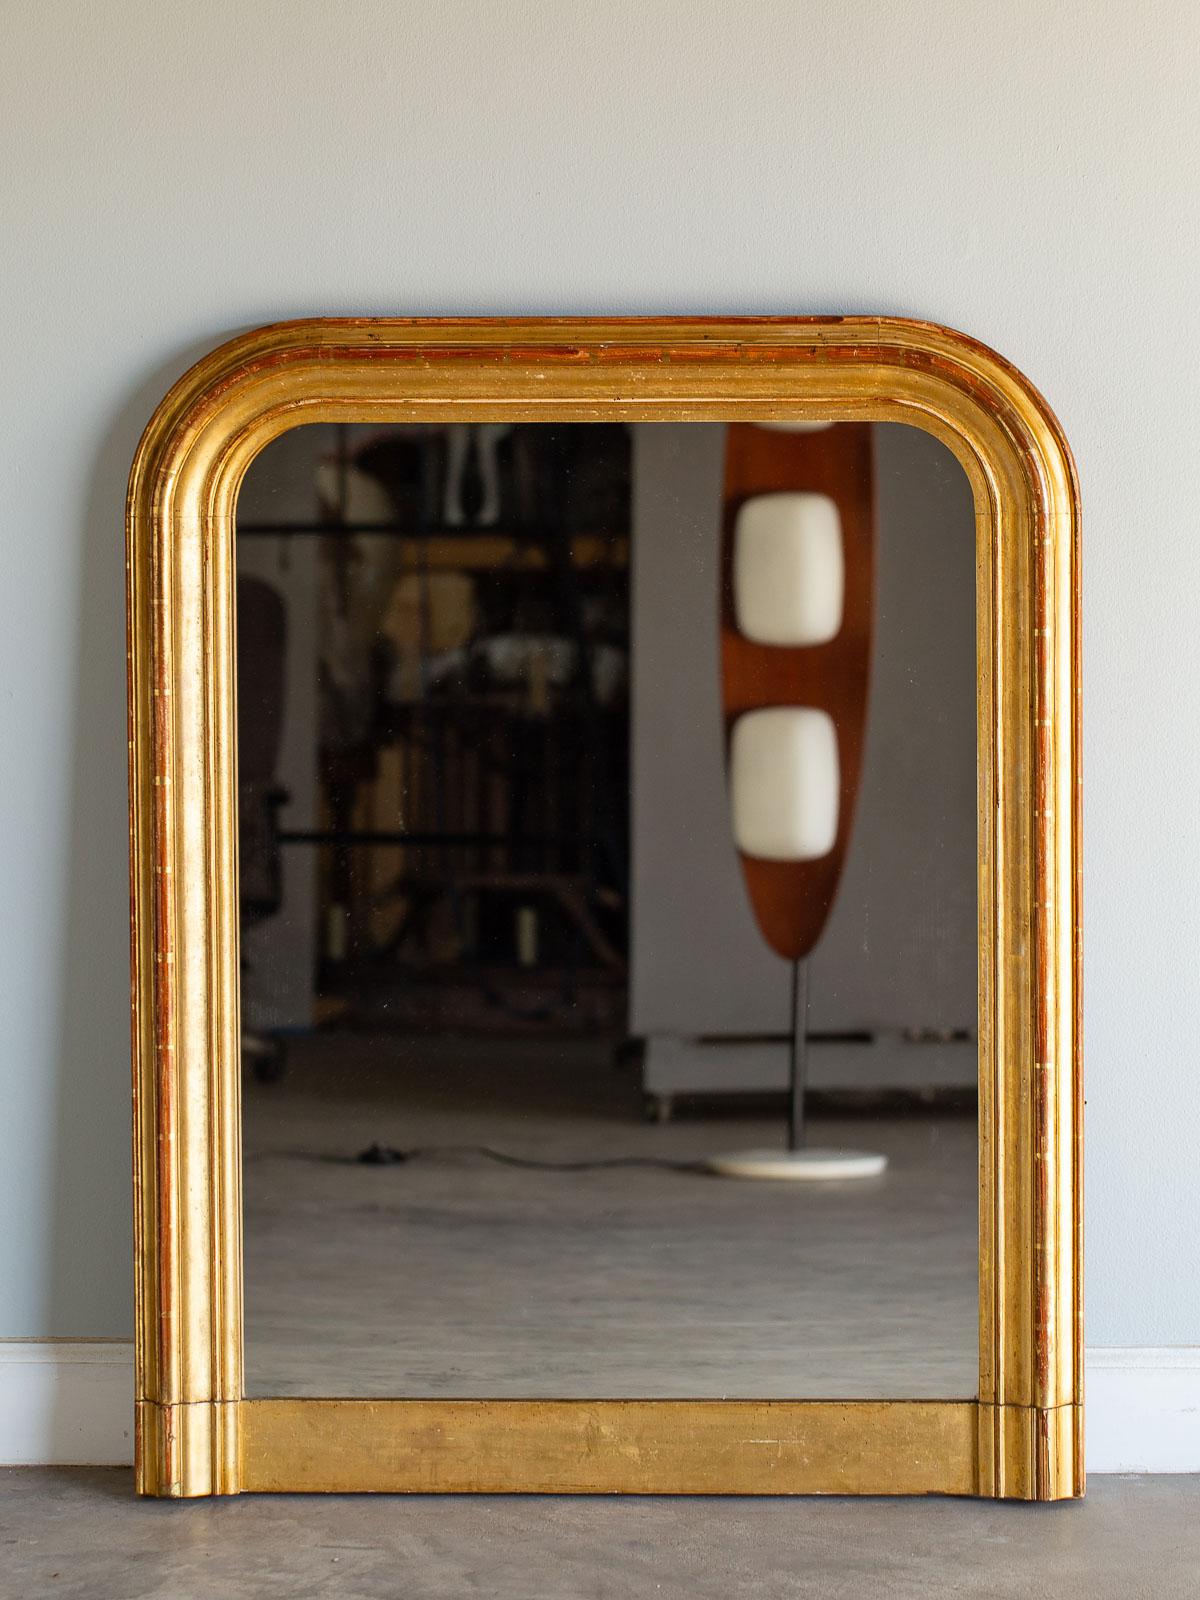 An antique French Louis Philippe gold mirror, circa 1885 with the original mirror glass and gold leaf detailing. Please be sure to enlarge the photographs to see the exceptional beauty of both the molding profile and the luminous beauty of the hand